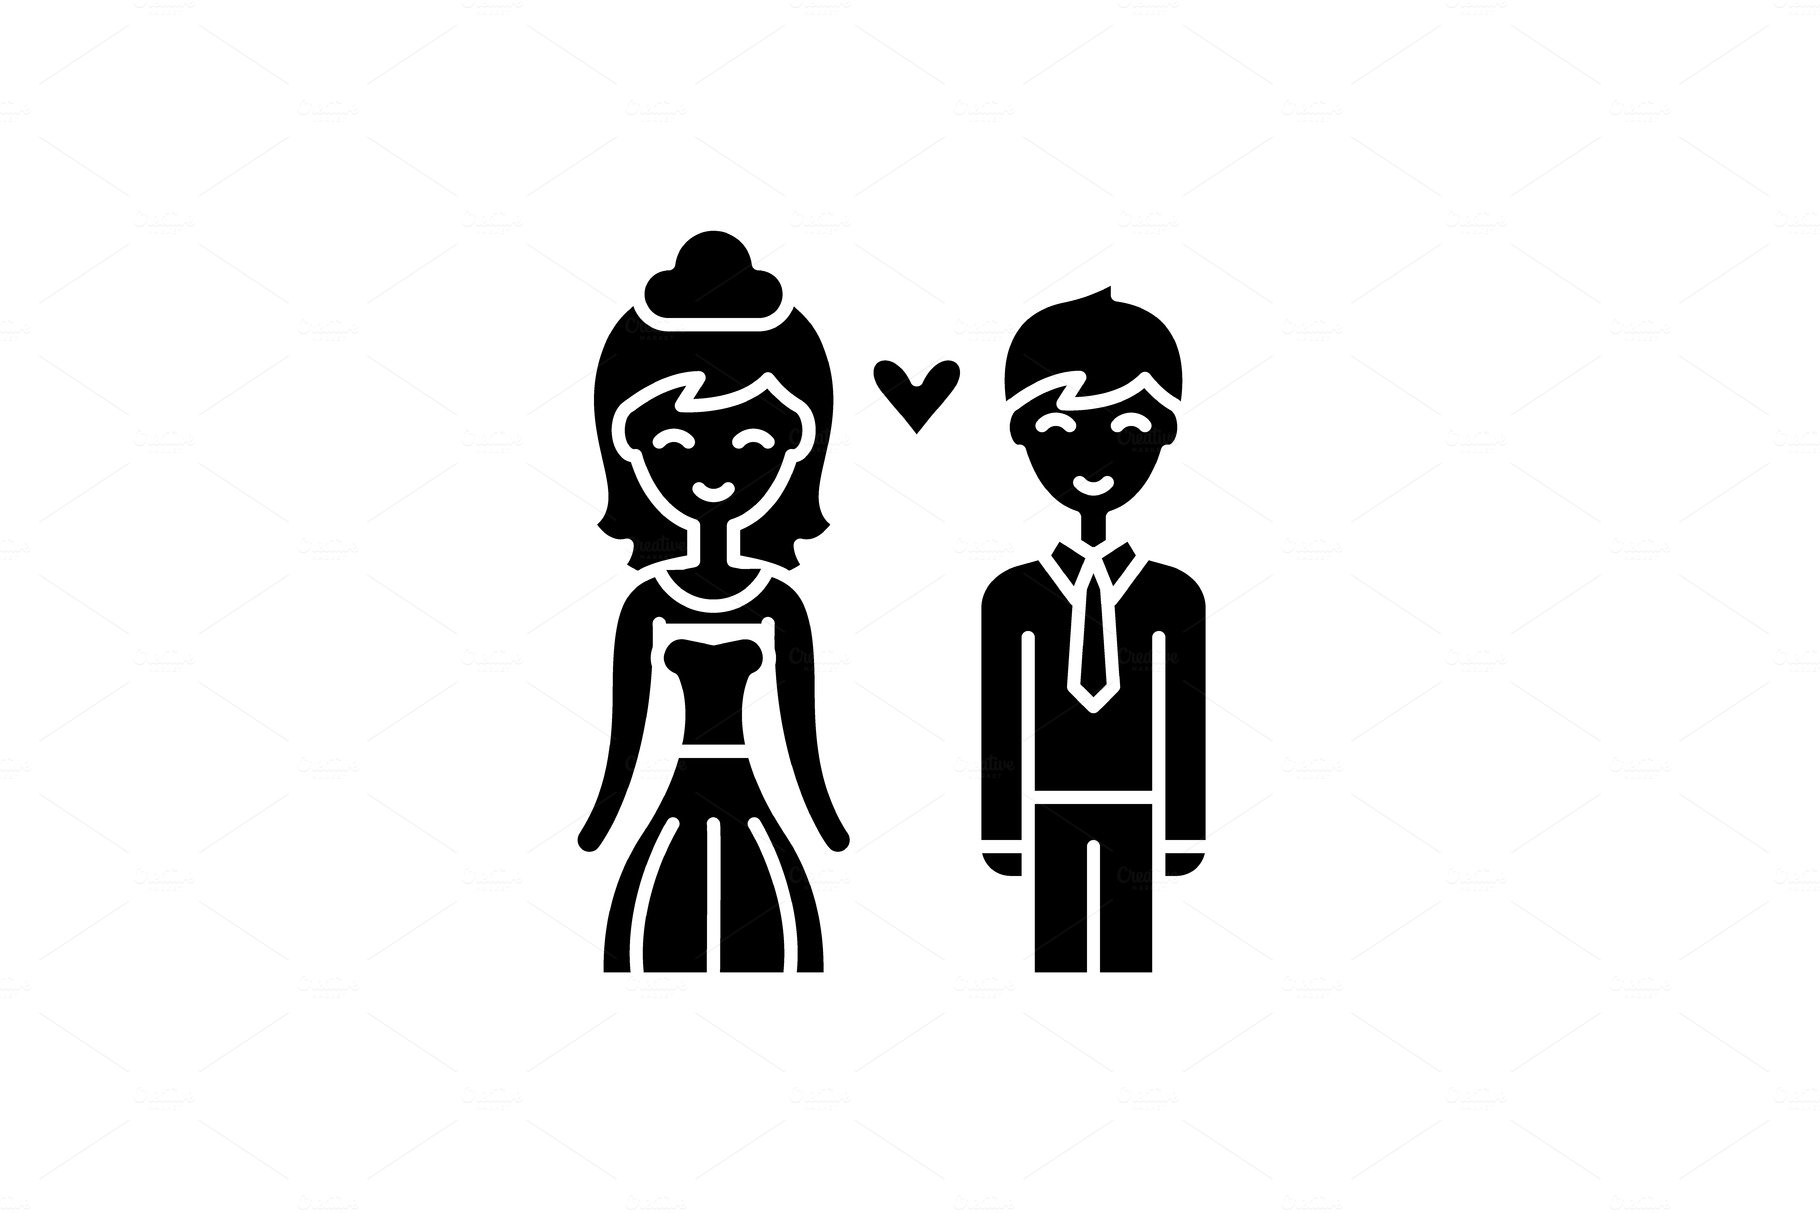 Happy newlyweds black icon, vector cover image.